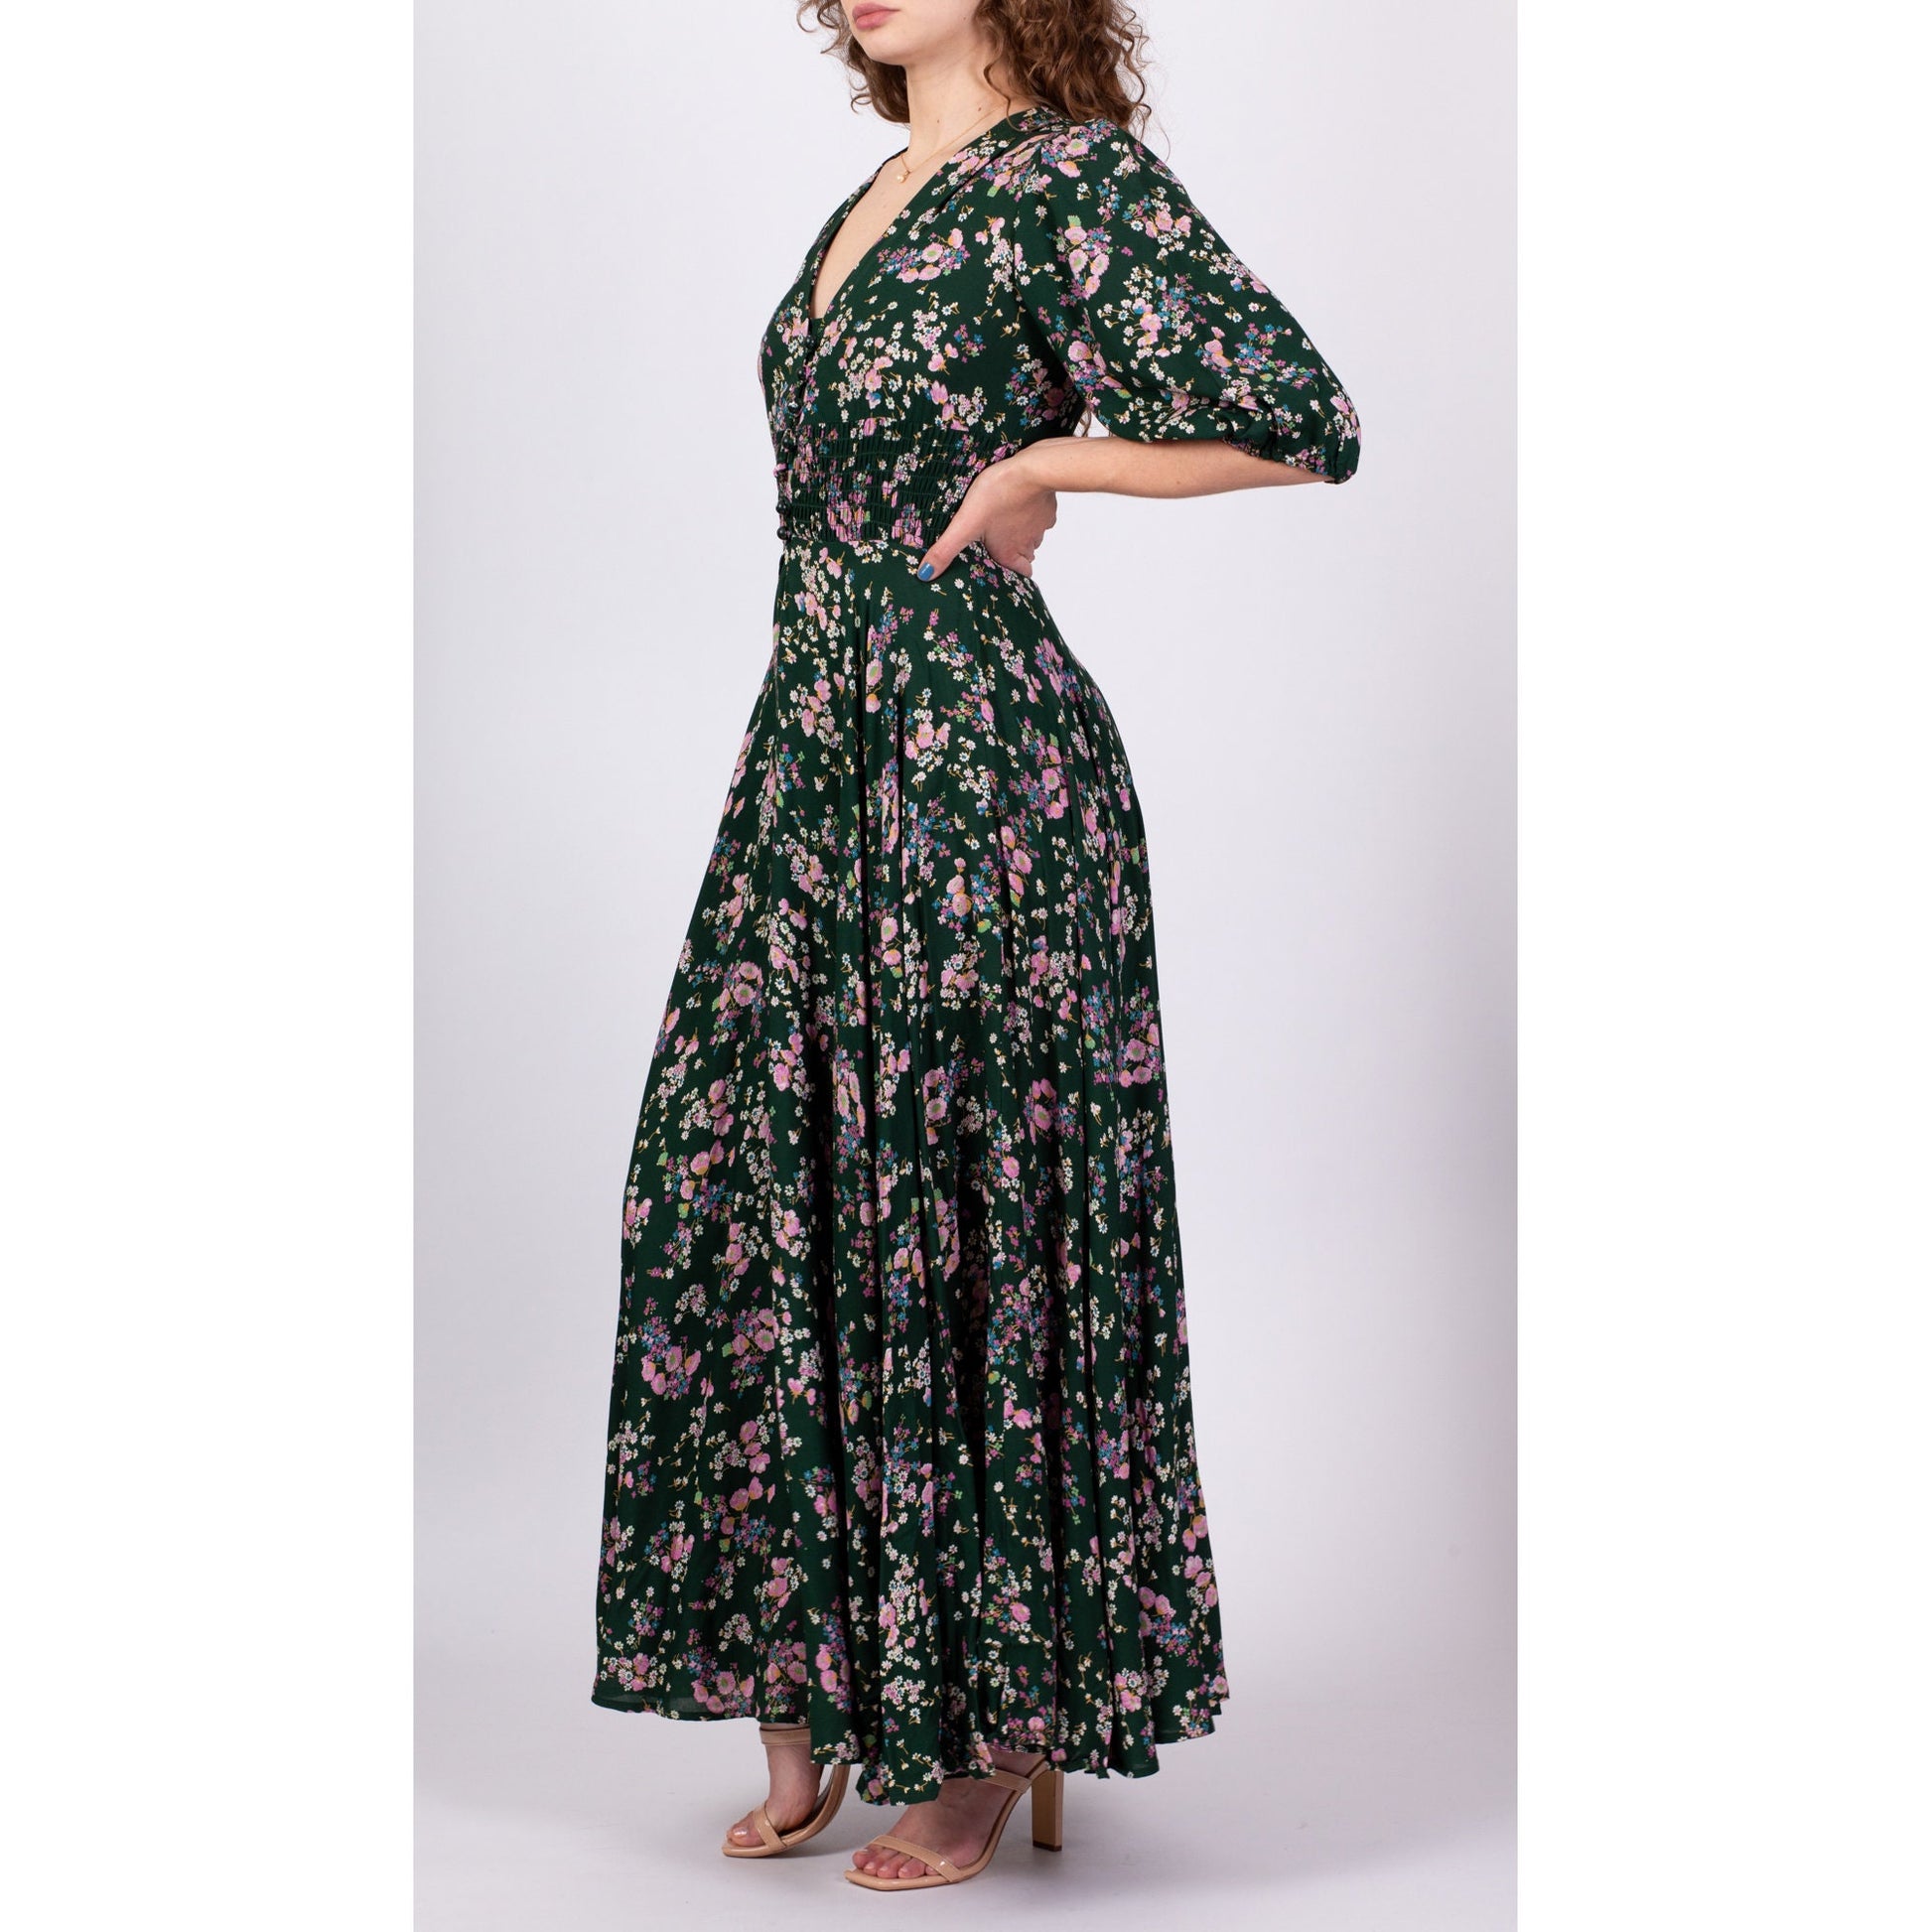 70s Green Floral Puff Sleeve Maxi Dress - Small to Medium 